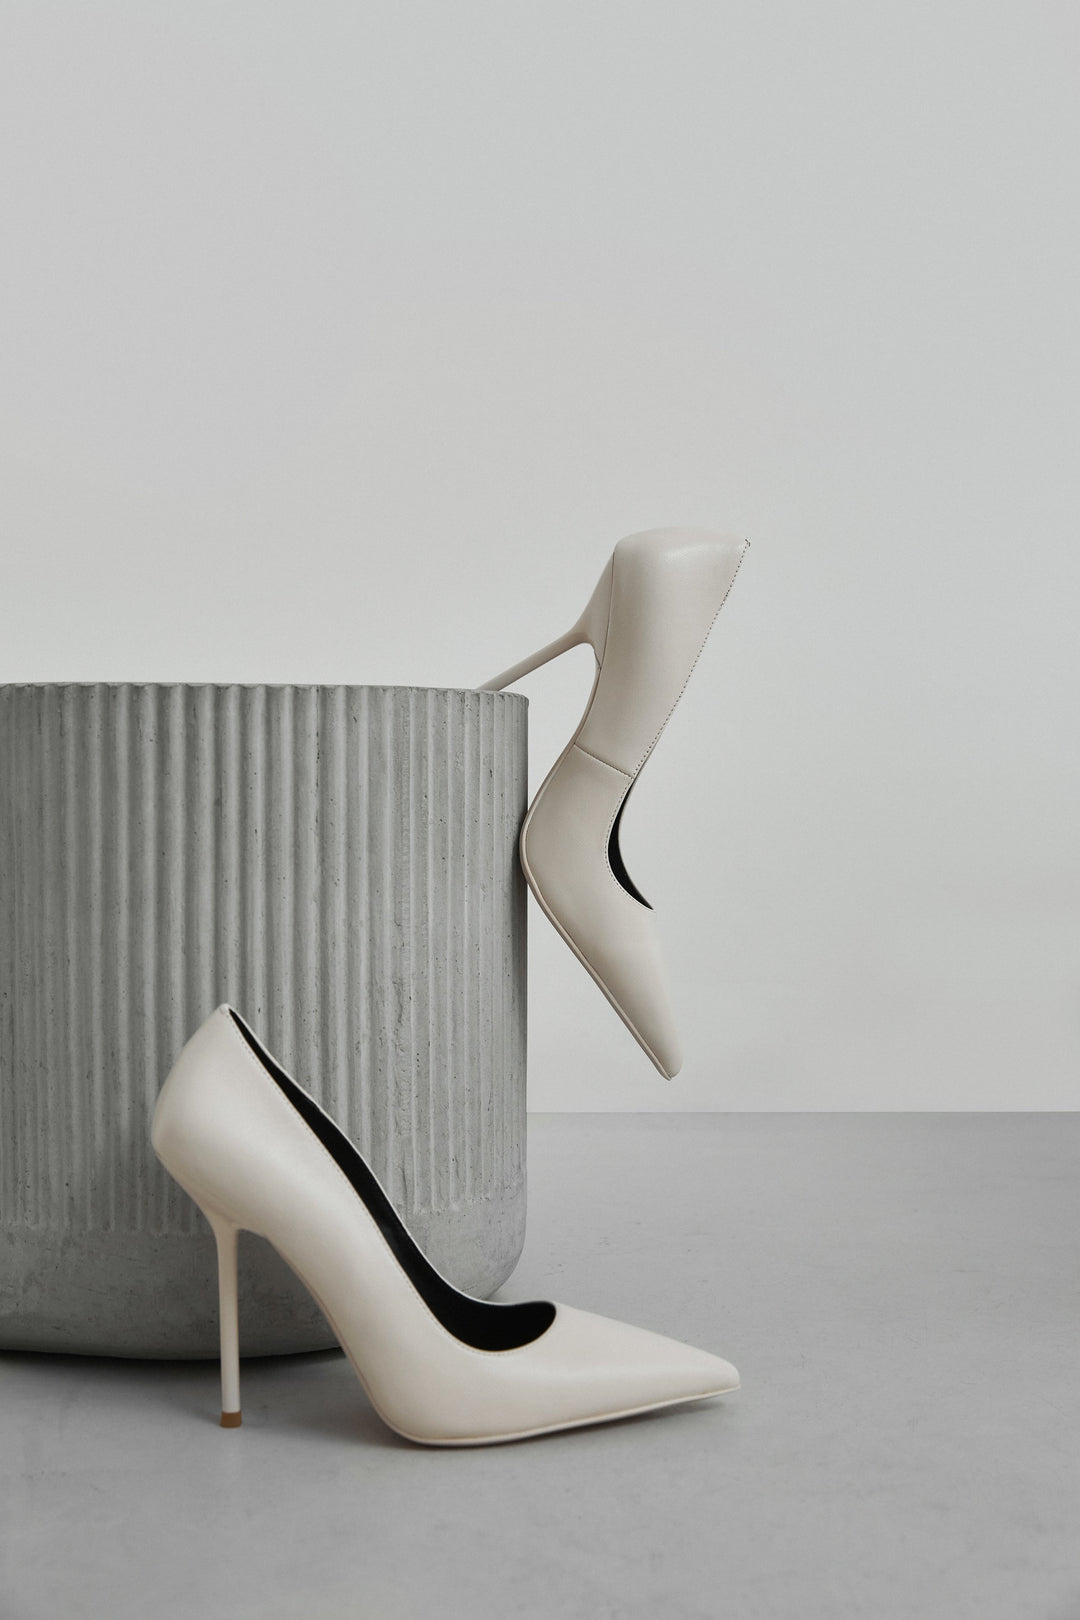 Women's White Pumps with Stiletto Heels made of Genuine Leather Estro ER00112676.